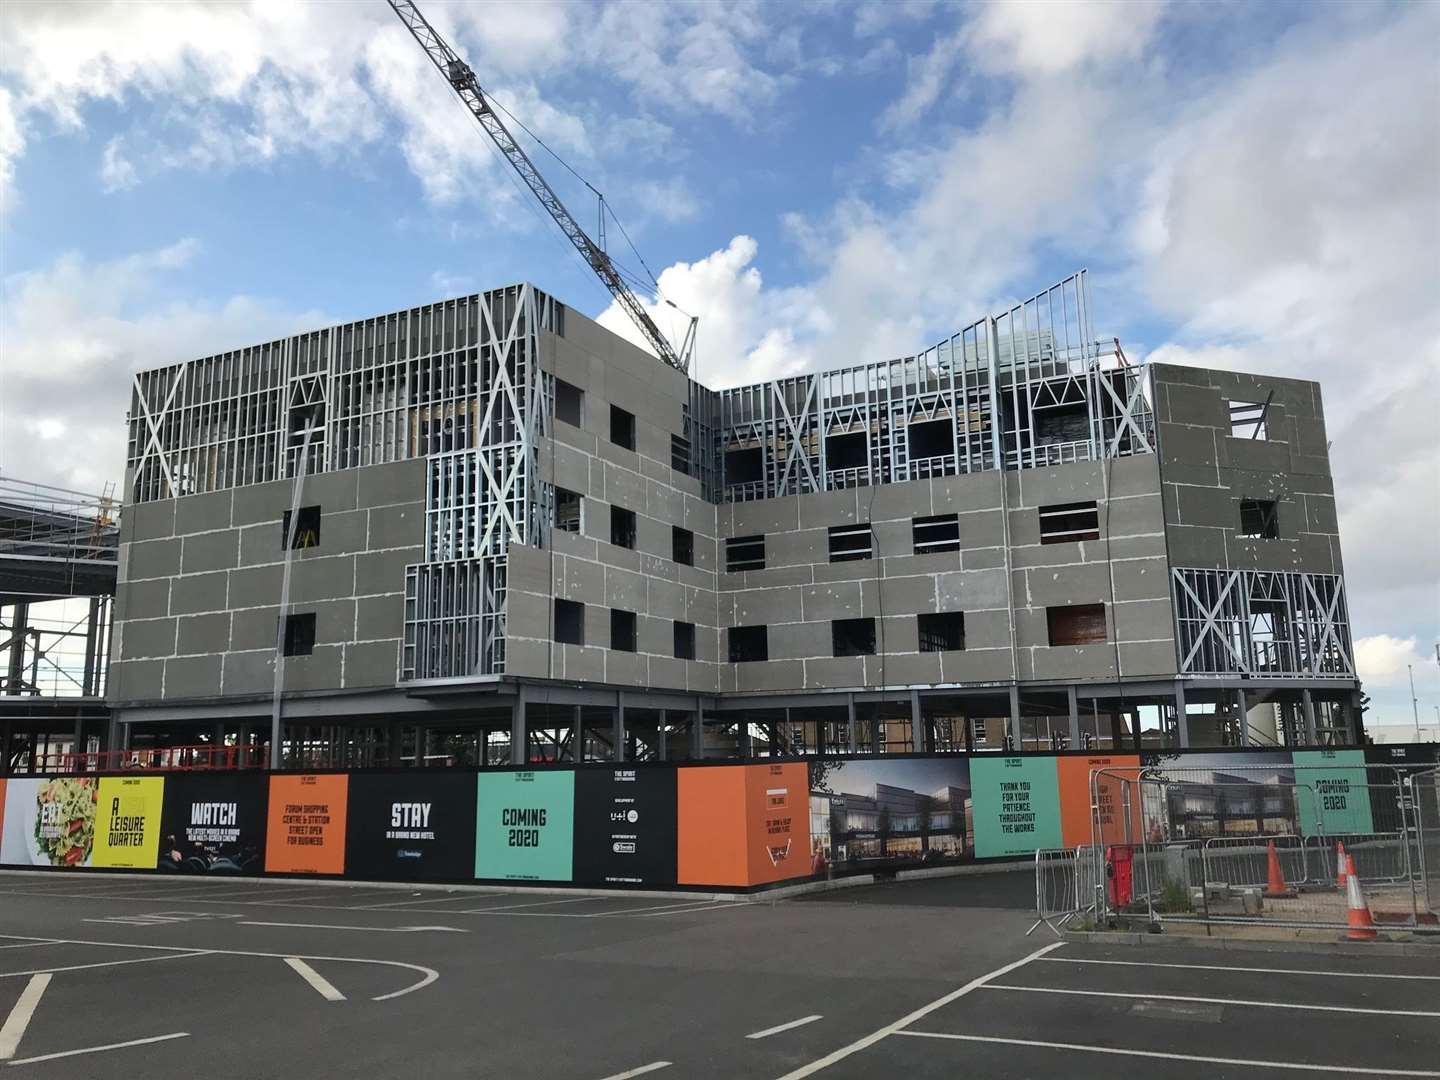 The Travelodge at an earlier stage of construction in the heart of Sittingbourne town centre